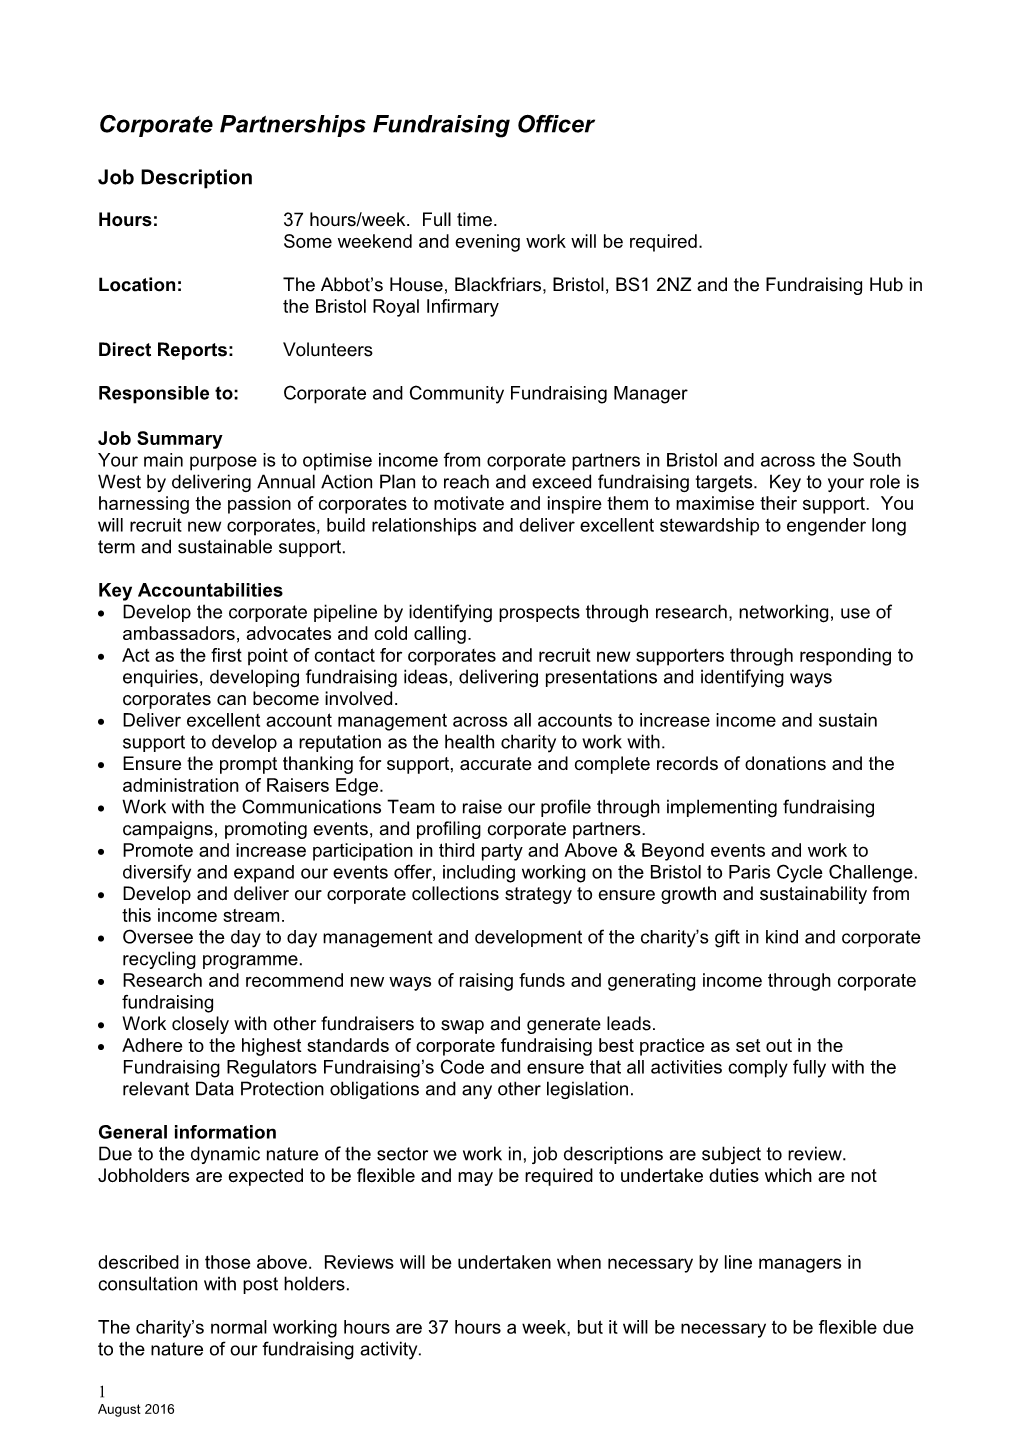 Corporate Partnerships Fundraising Officer